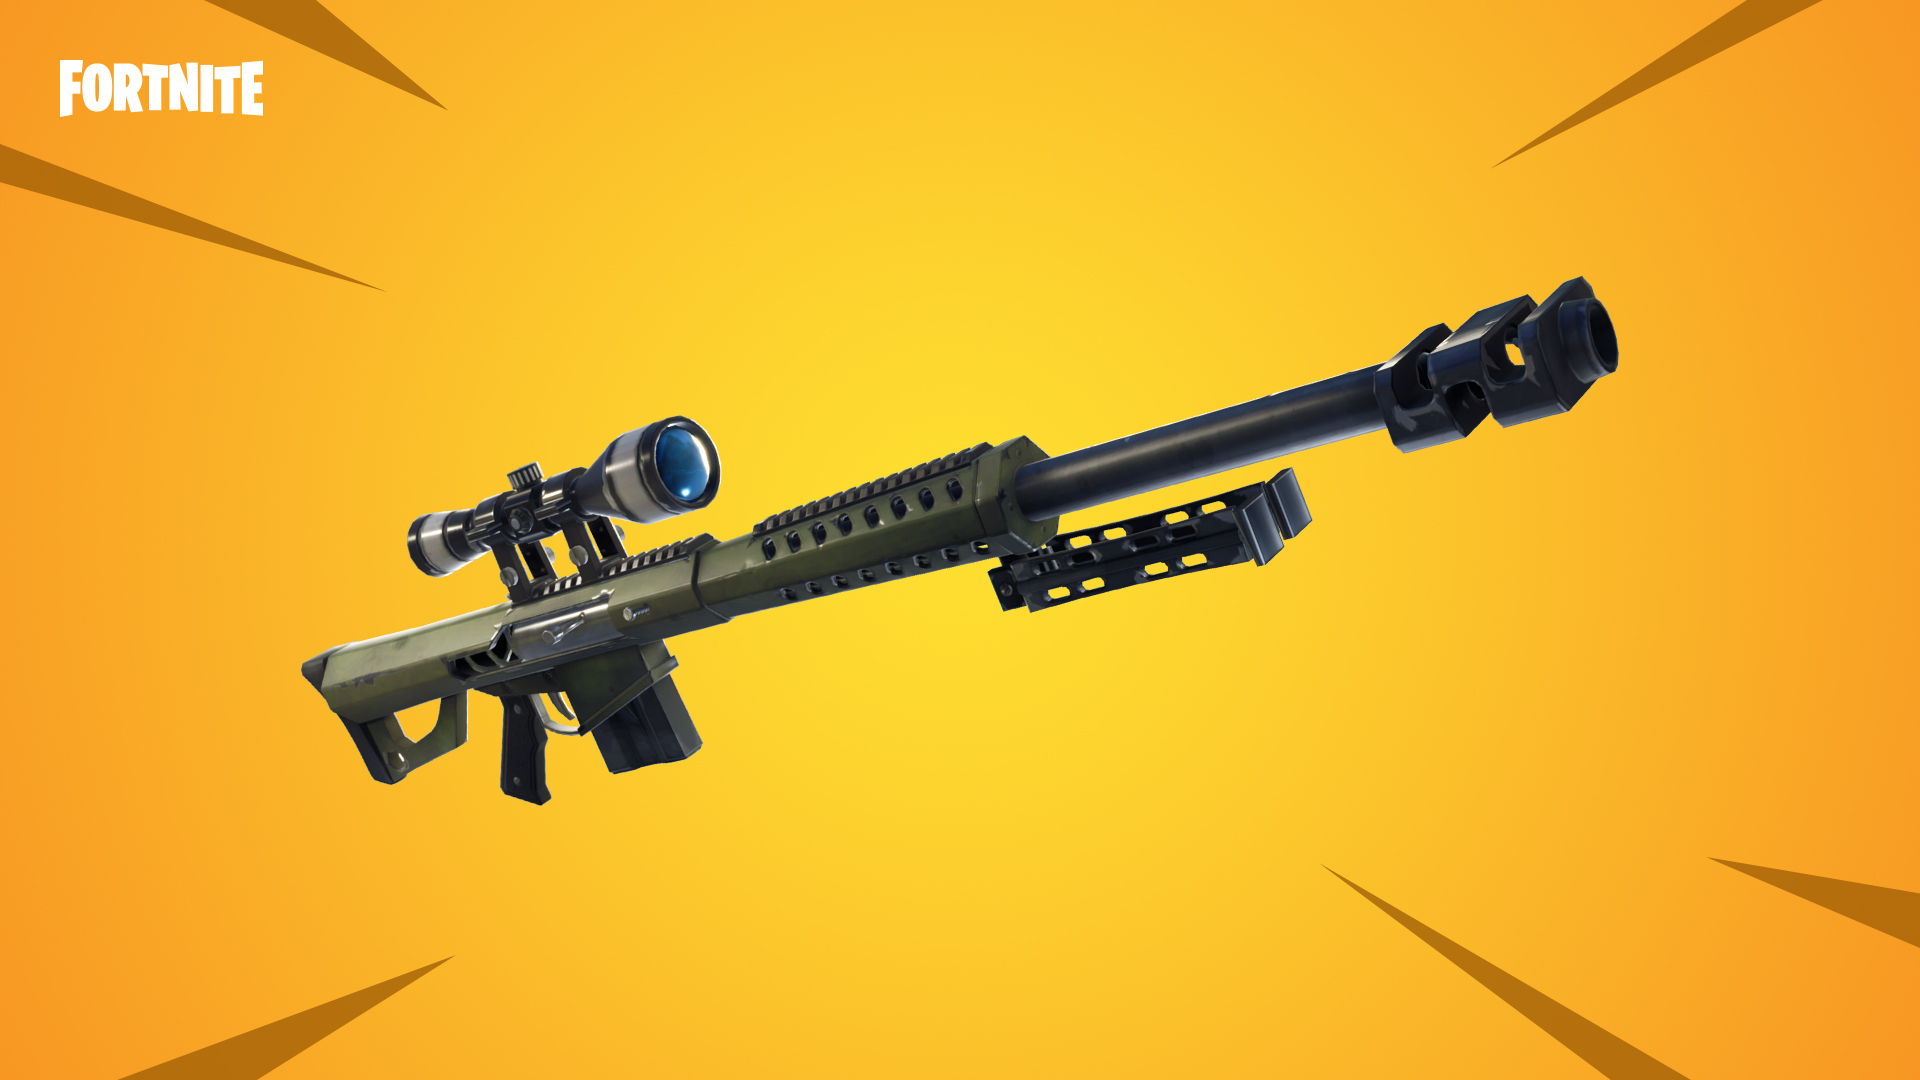 Fortnite%2Fpatch-notes%2Fv5-21%2Foverview-text-v5-21%2FBR05_Yellow_Social_Heavy-Sniper-1920x1080-64c00b03bf0c4f747077946212885c9564a69a72.jpg